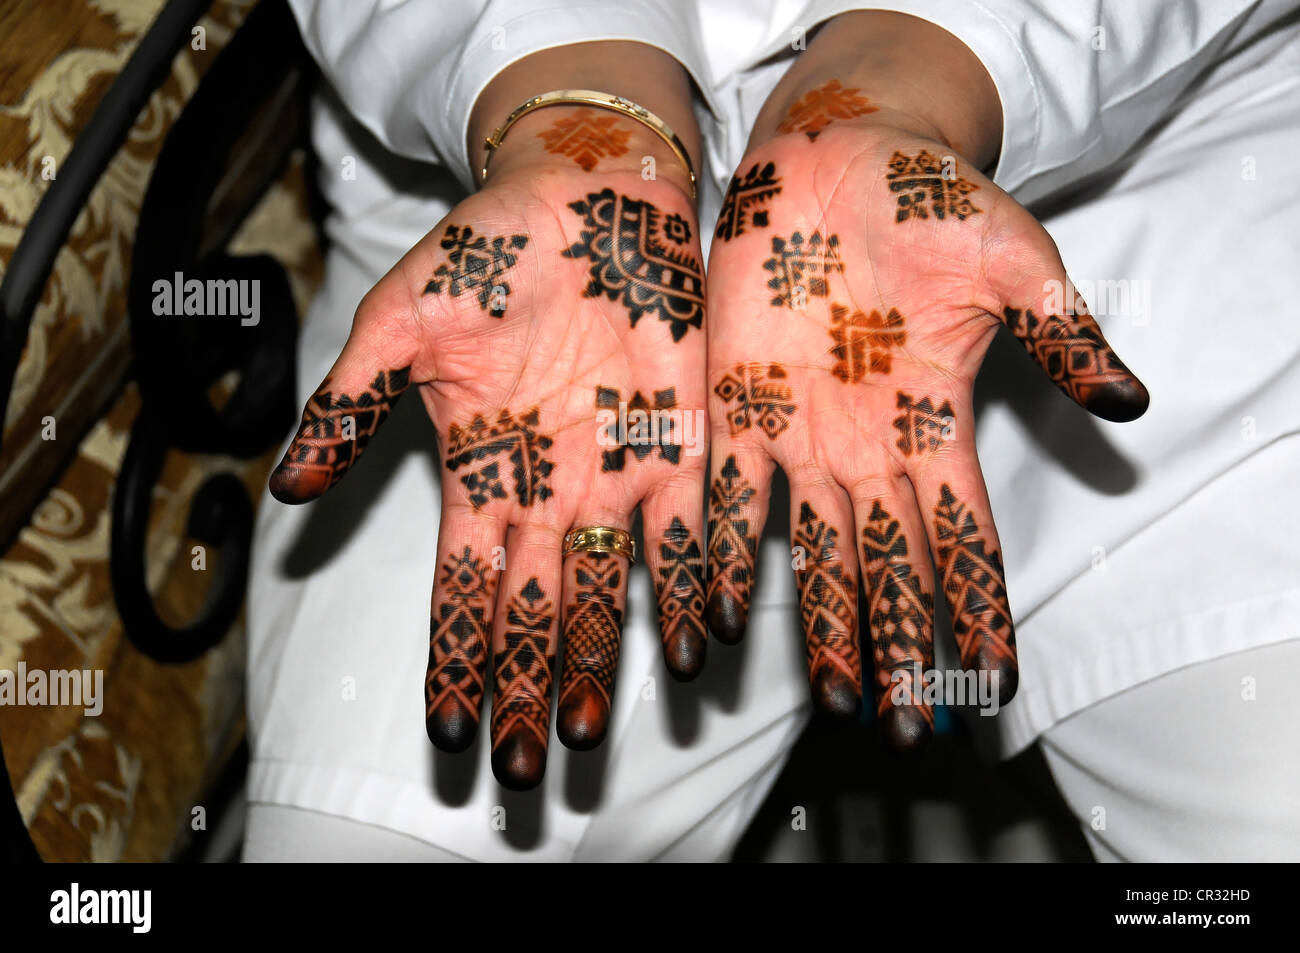 Henna tattoo on the hands of a tourist, Djemaa el-Fna square, 